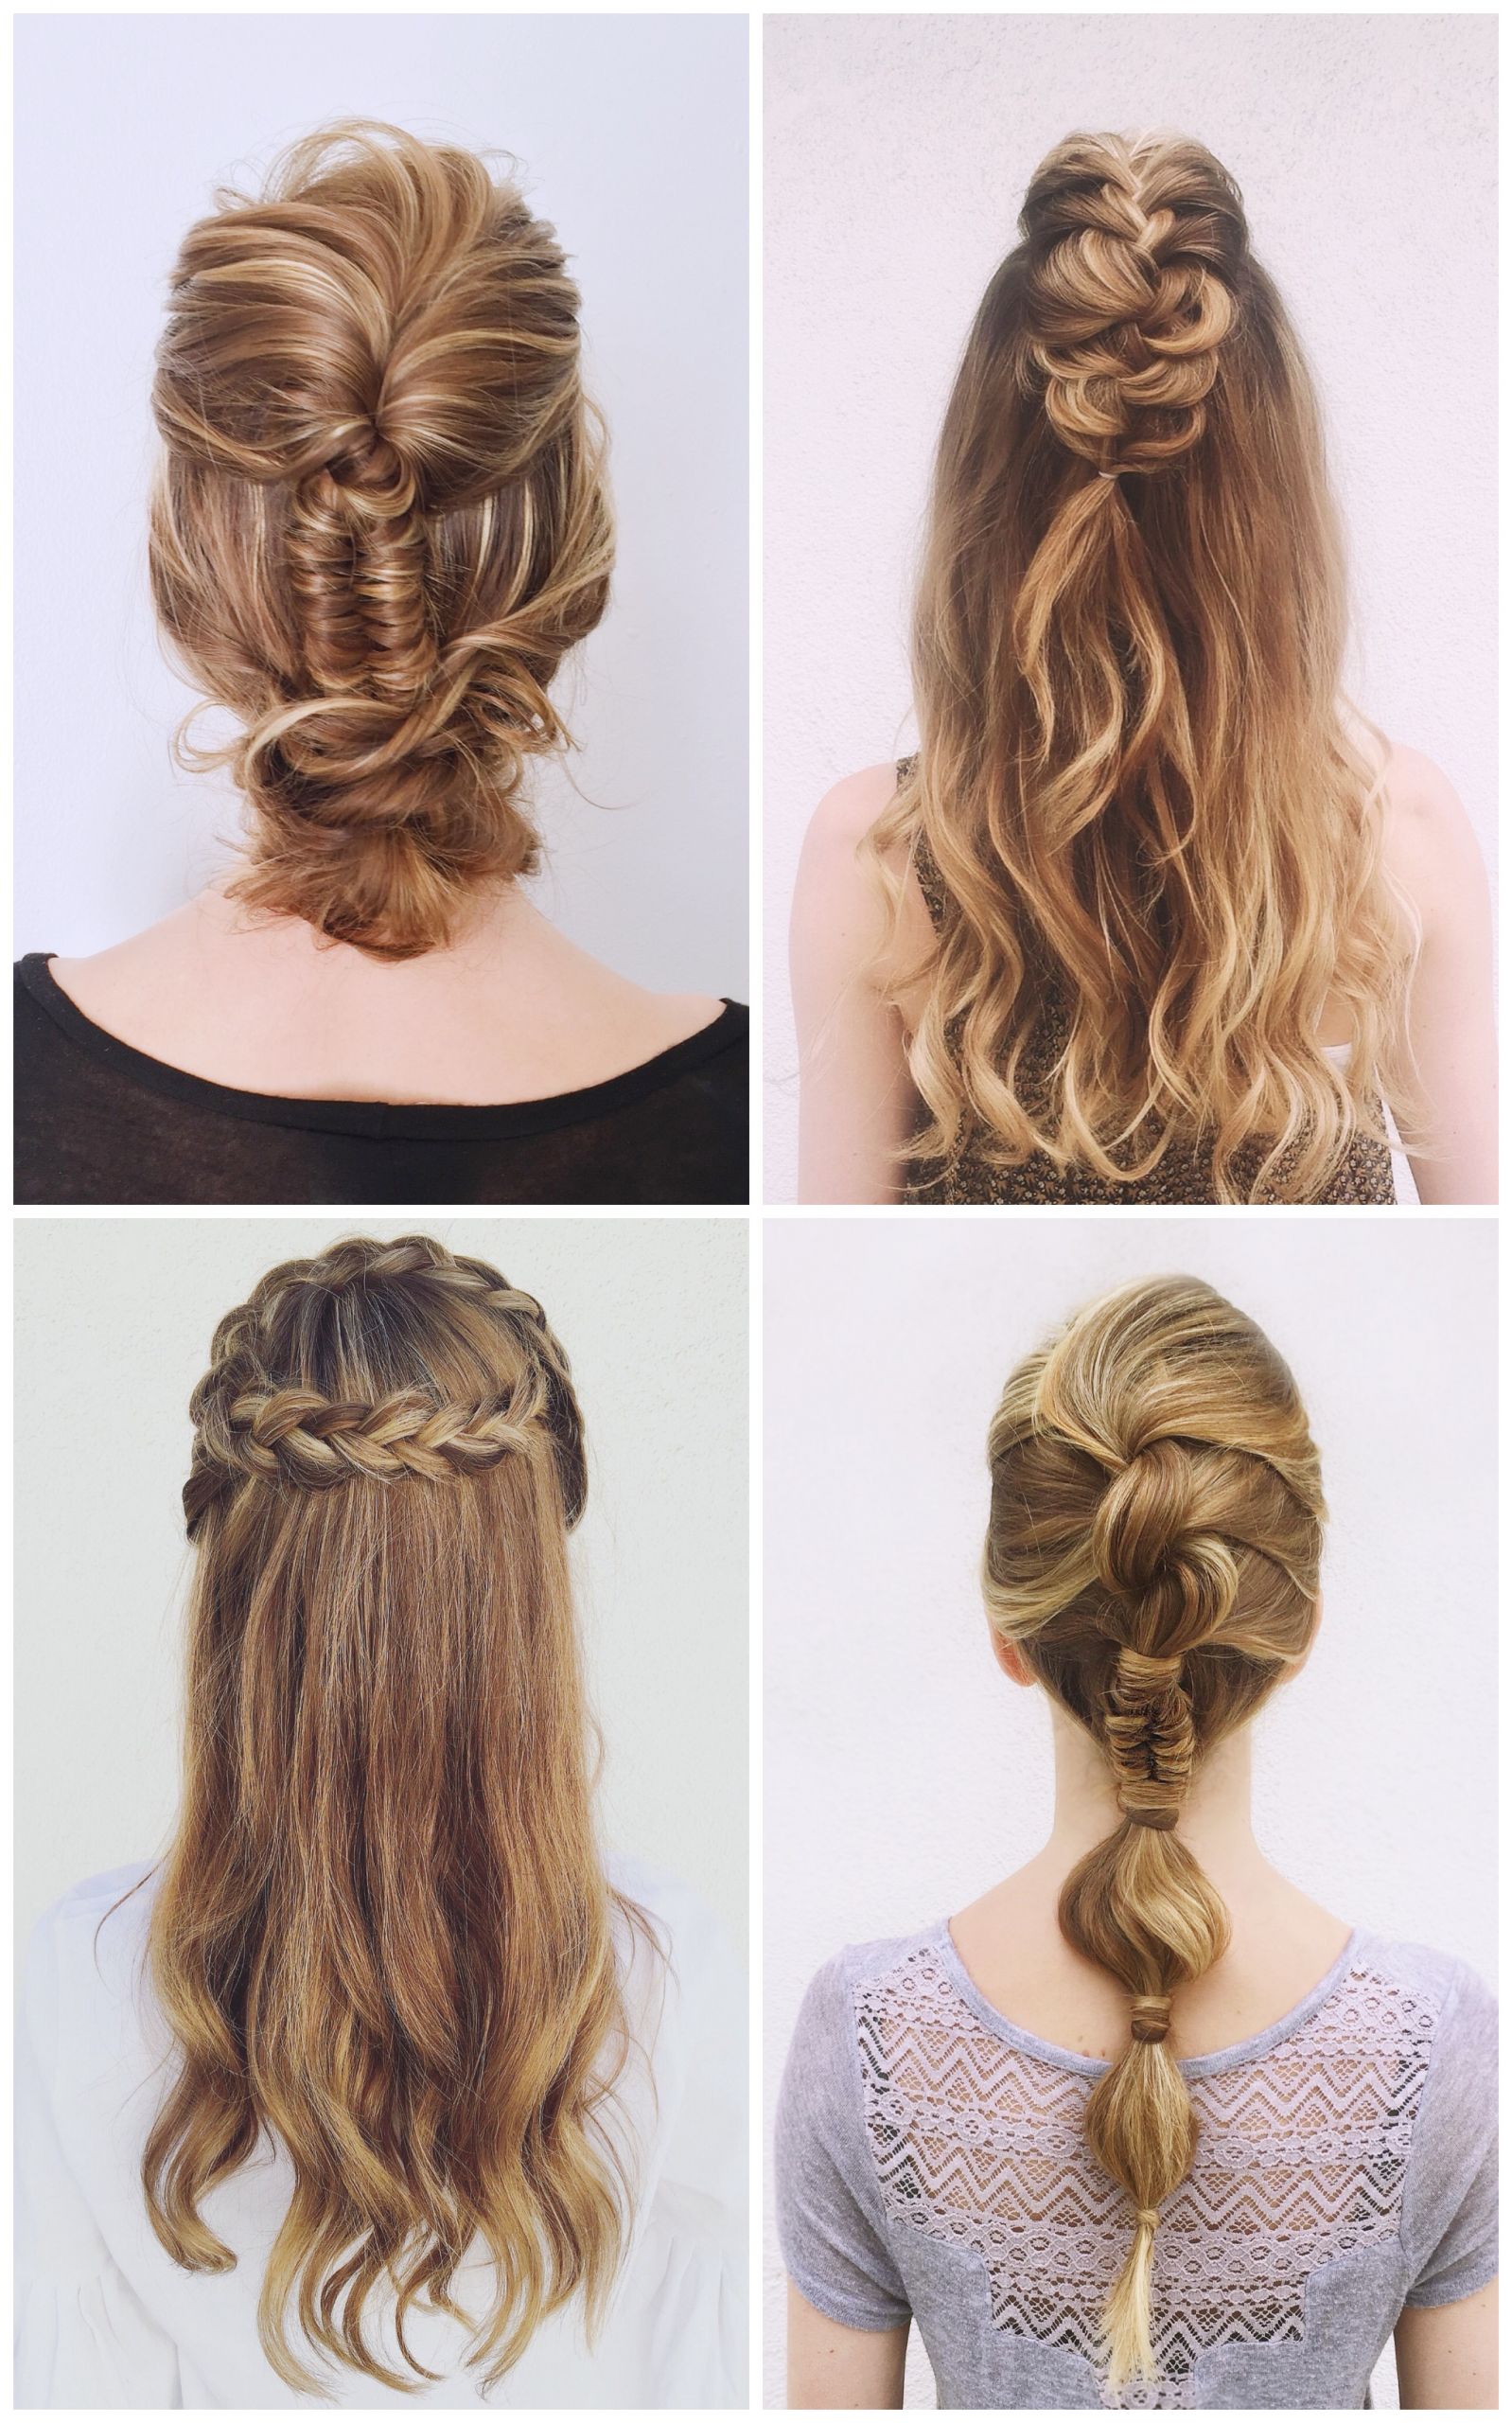 Prom Hairstyle Braid
 20 Cute Prom Braid Hairstyles to Try for Medium and Long Hair